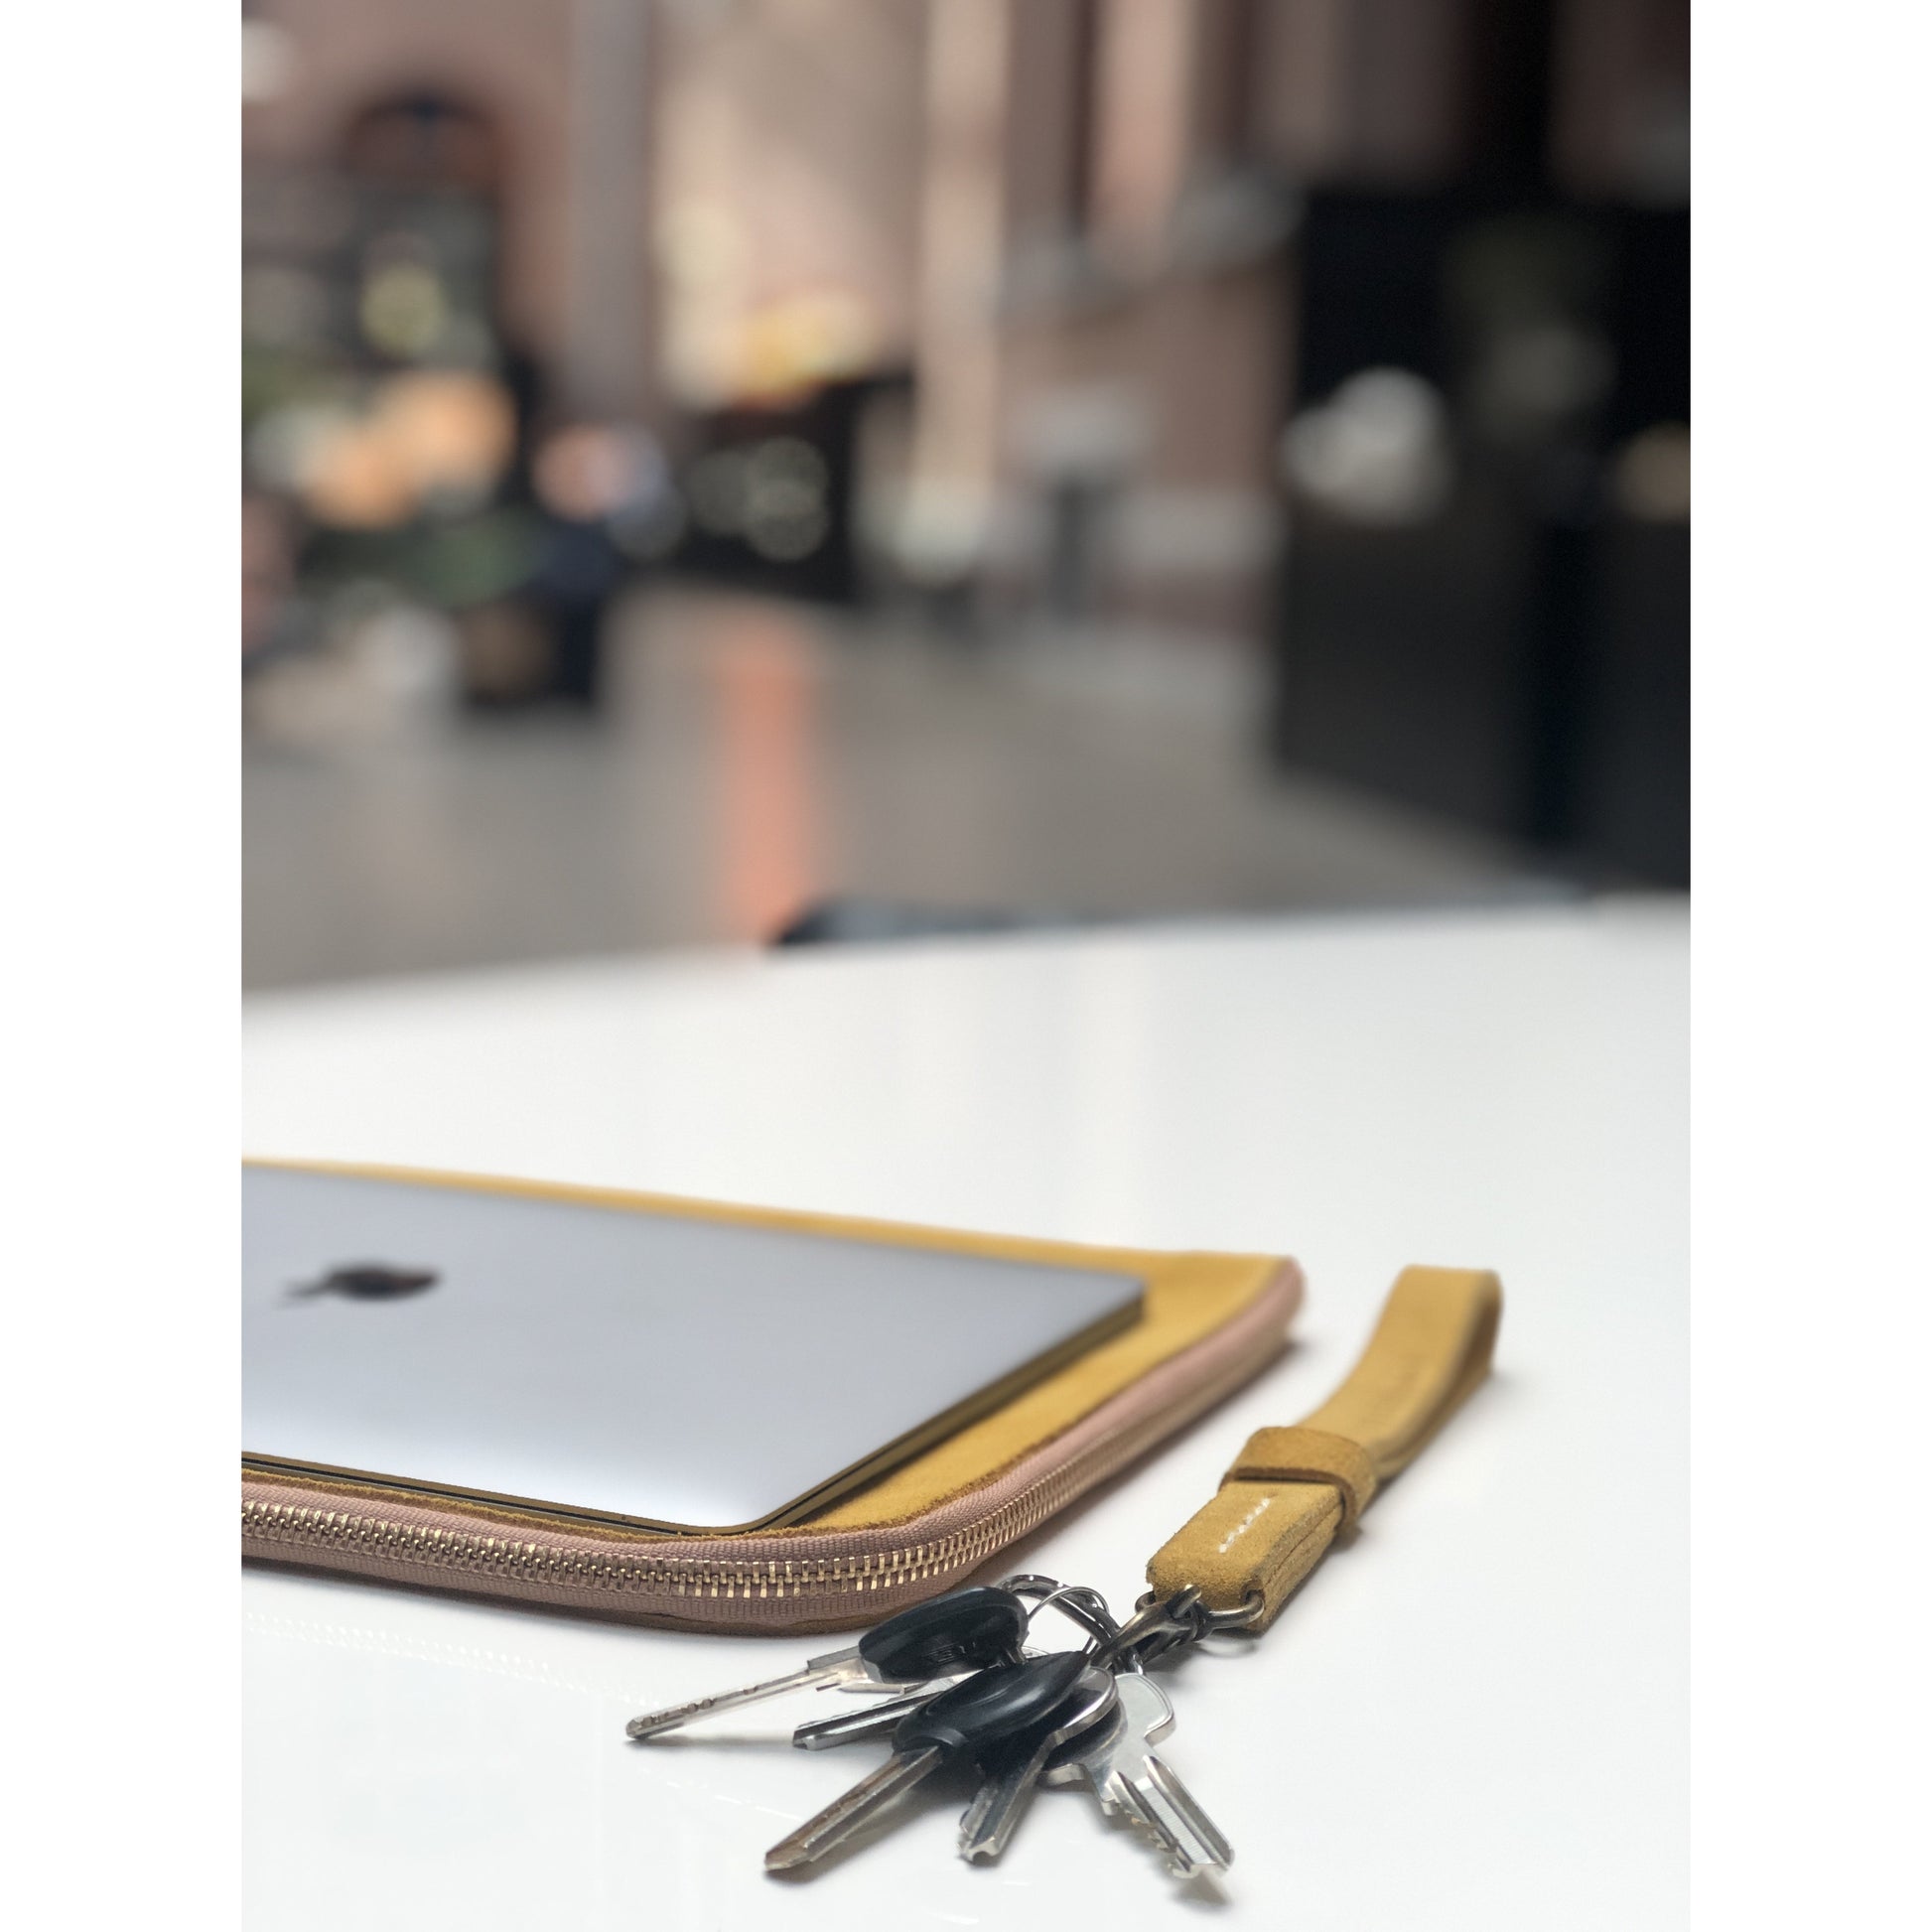 Keychain in suede leather with brass clip on - counterfitstudio